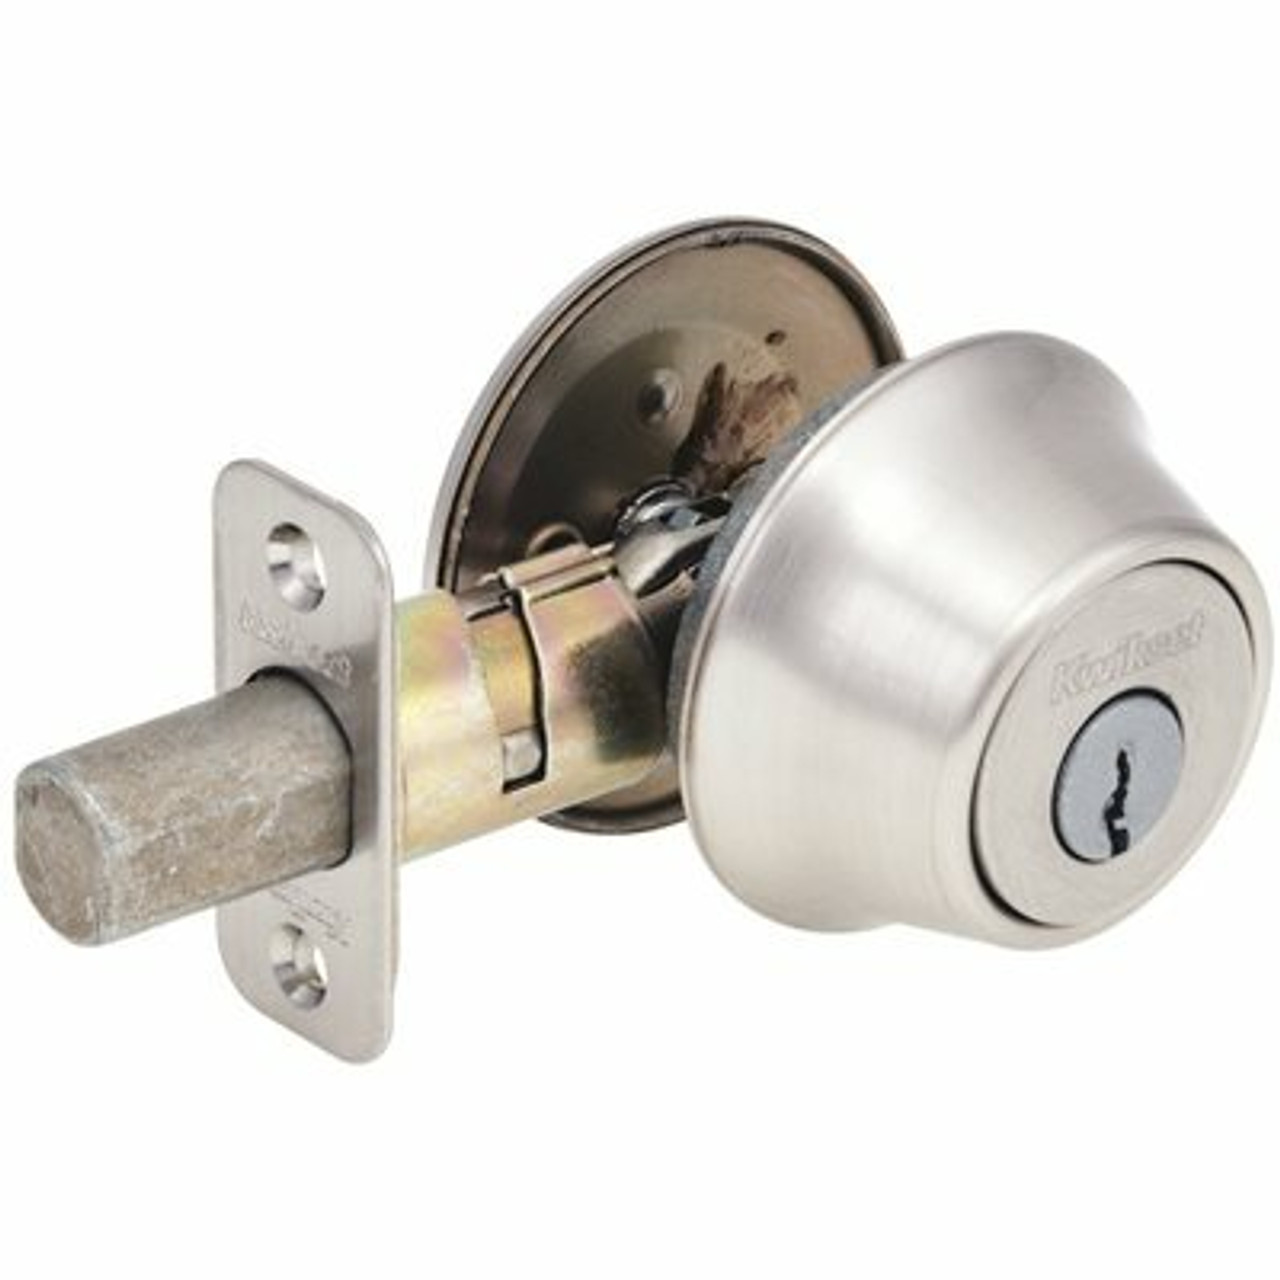 Kwikset 660 Series Satin Nickel Single Cylinder Deadbolt With Microban Antimicrobial Technology